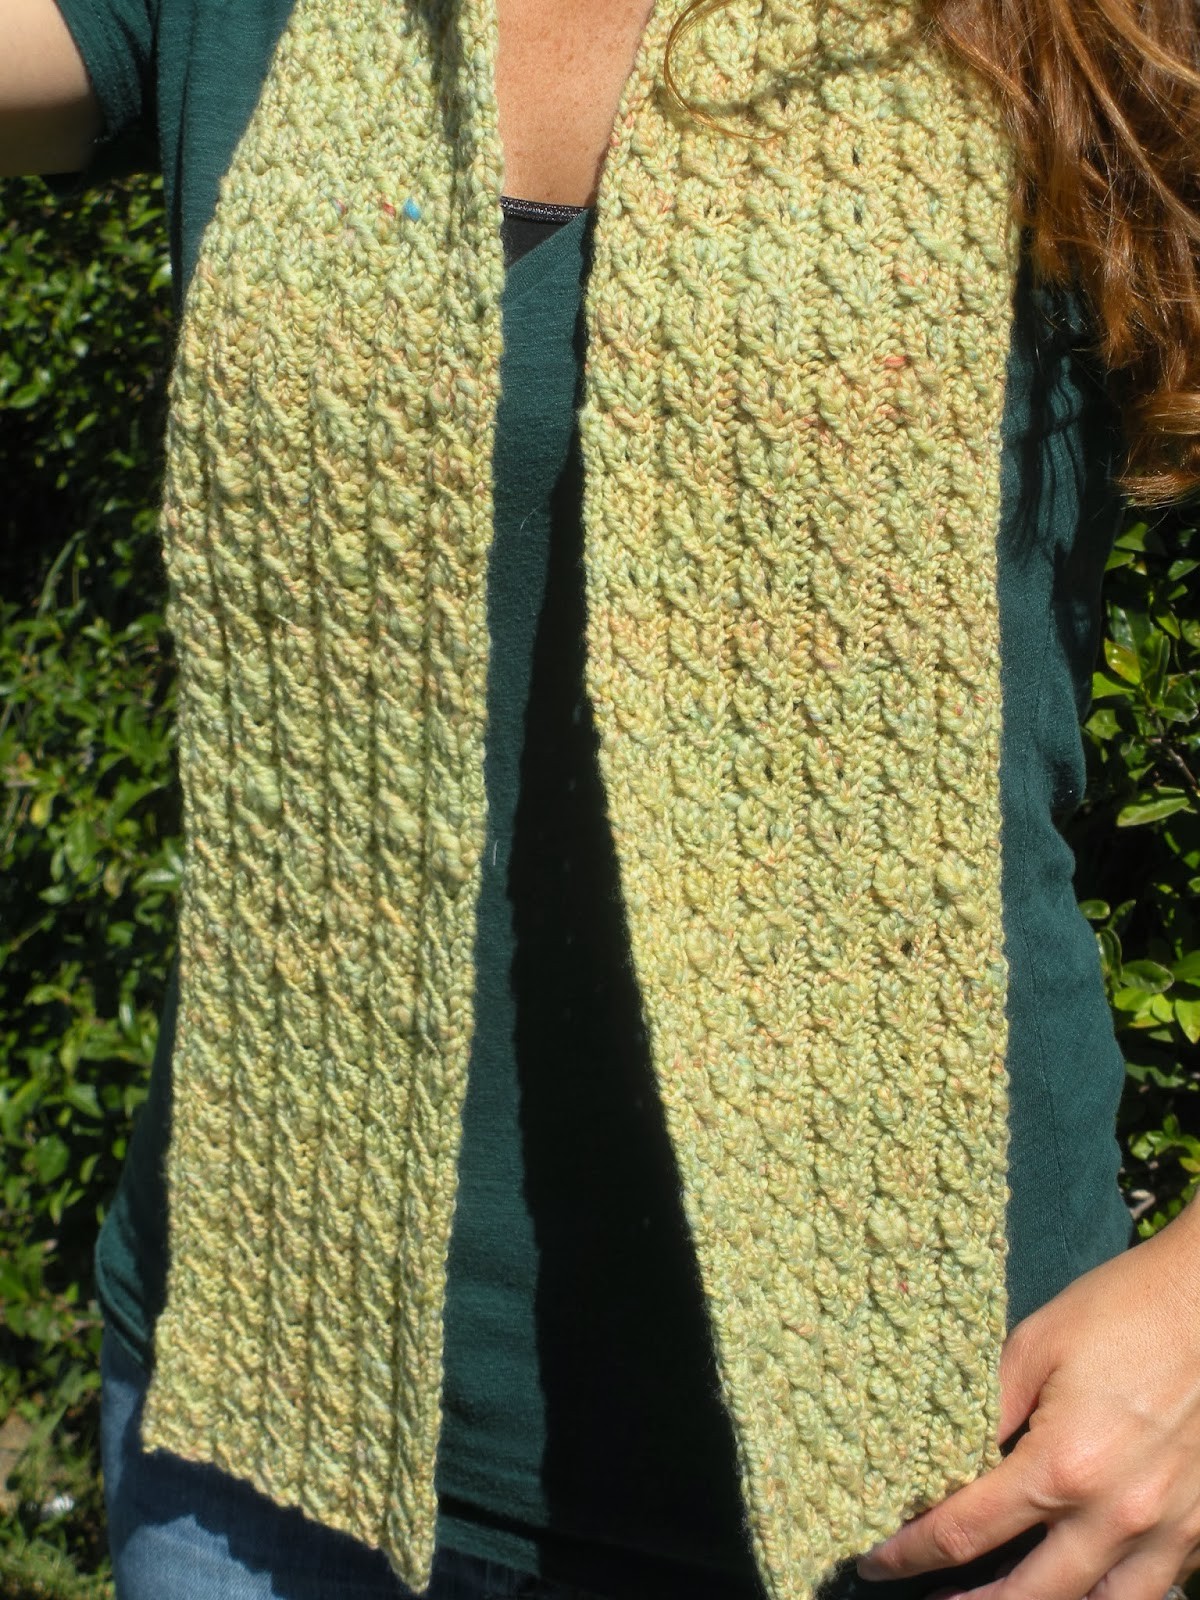 Cable Knit Scarf Pattern A Knitting Blog